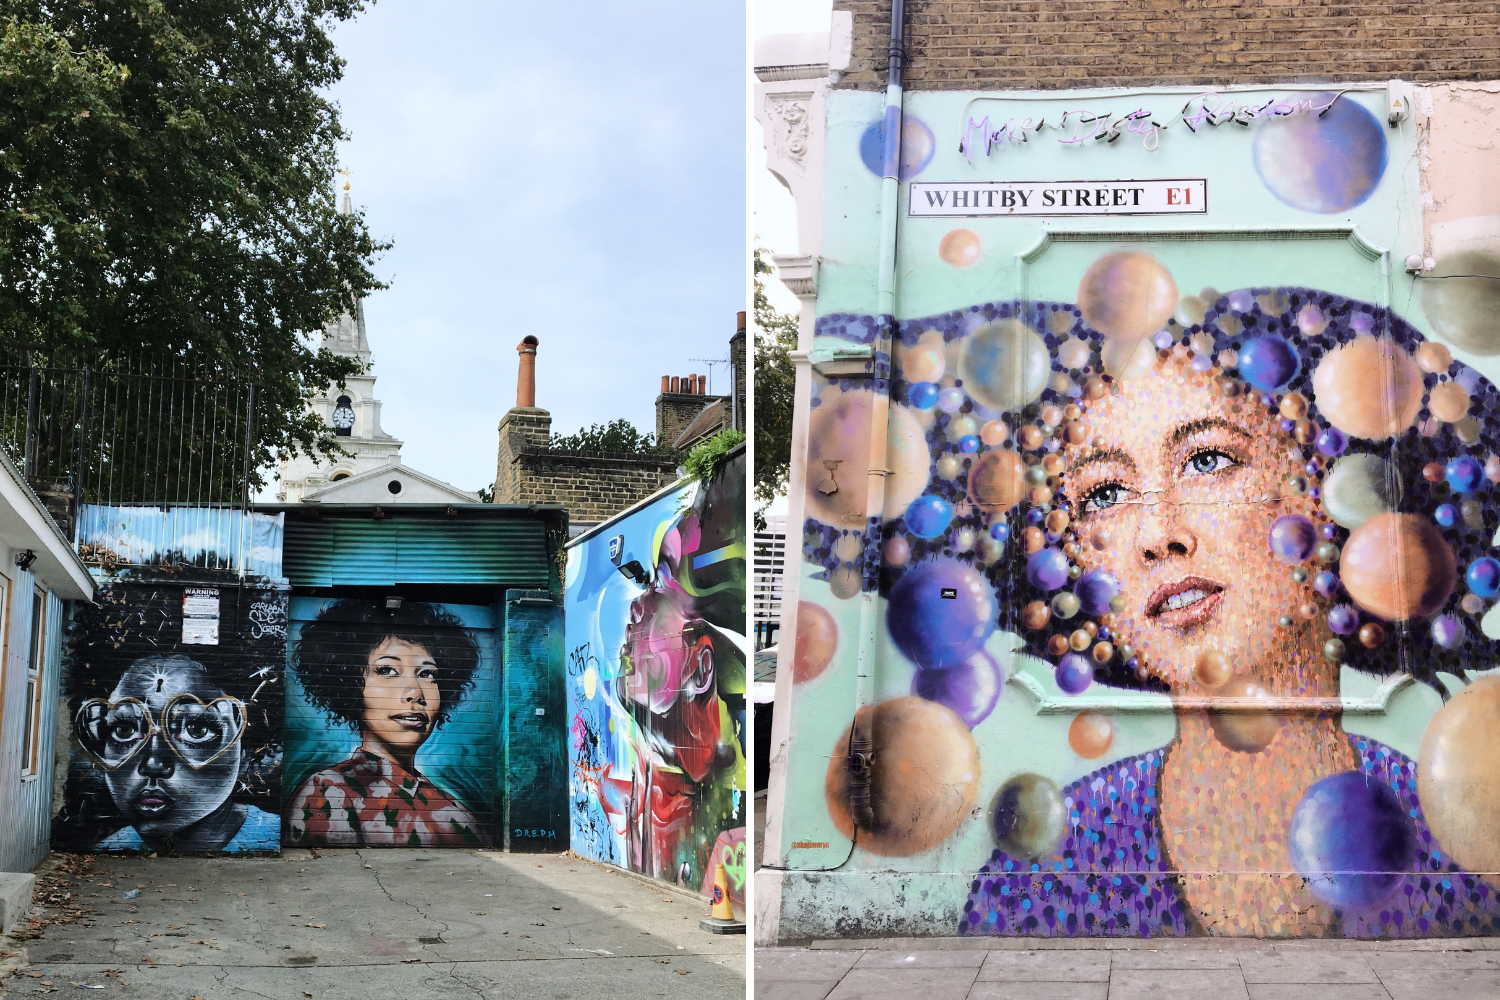 London is definitely one of the best street art cities in the world